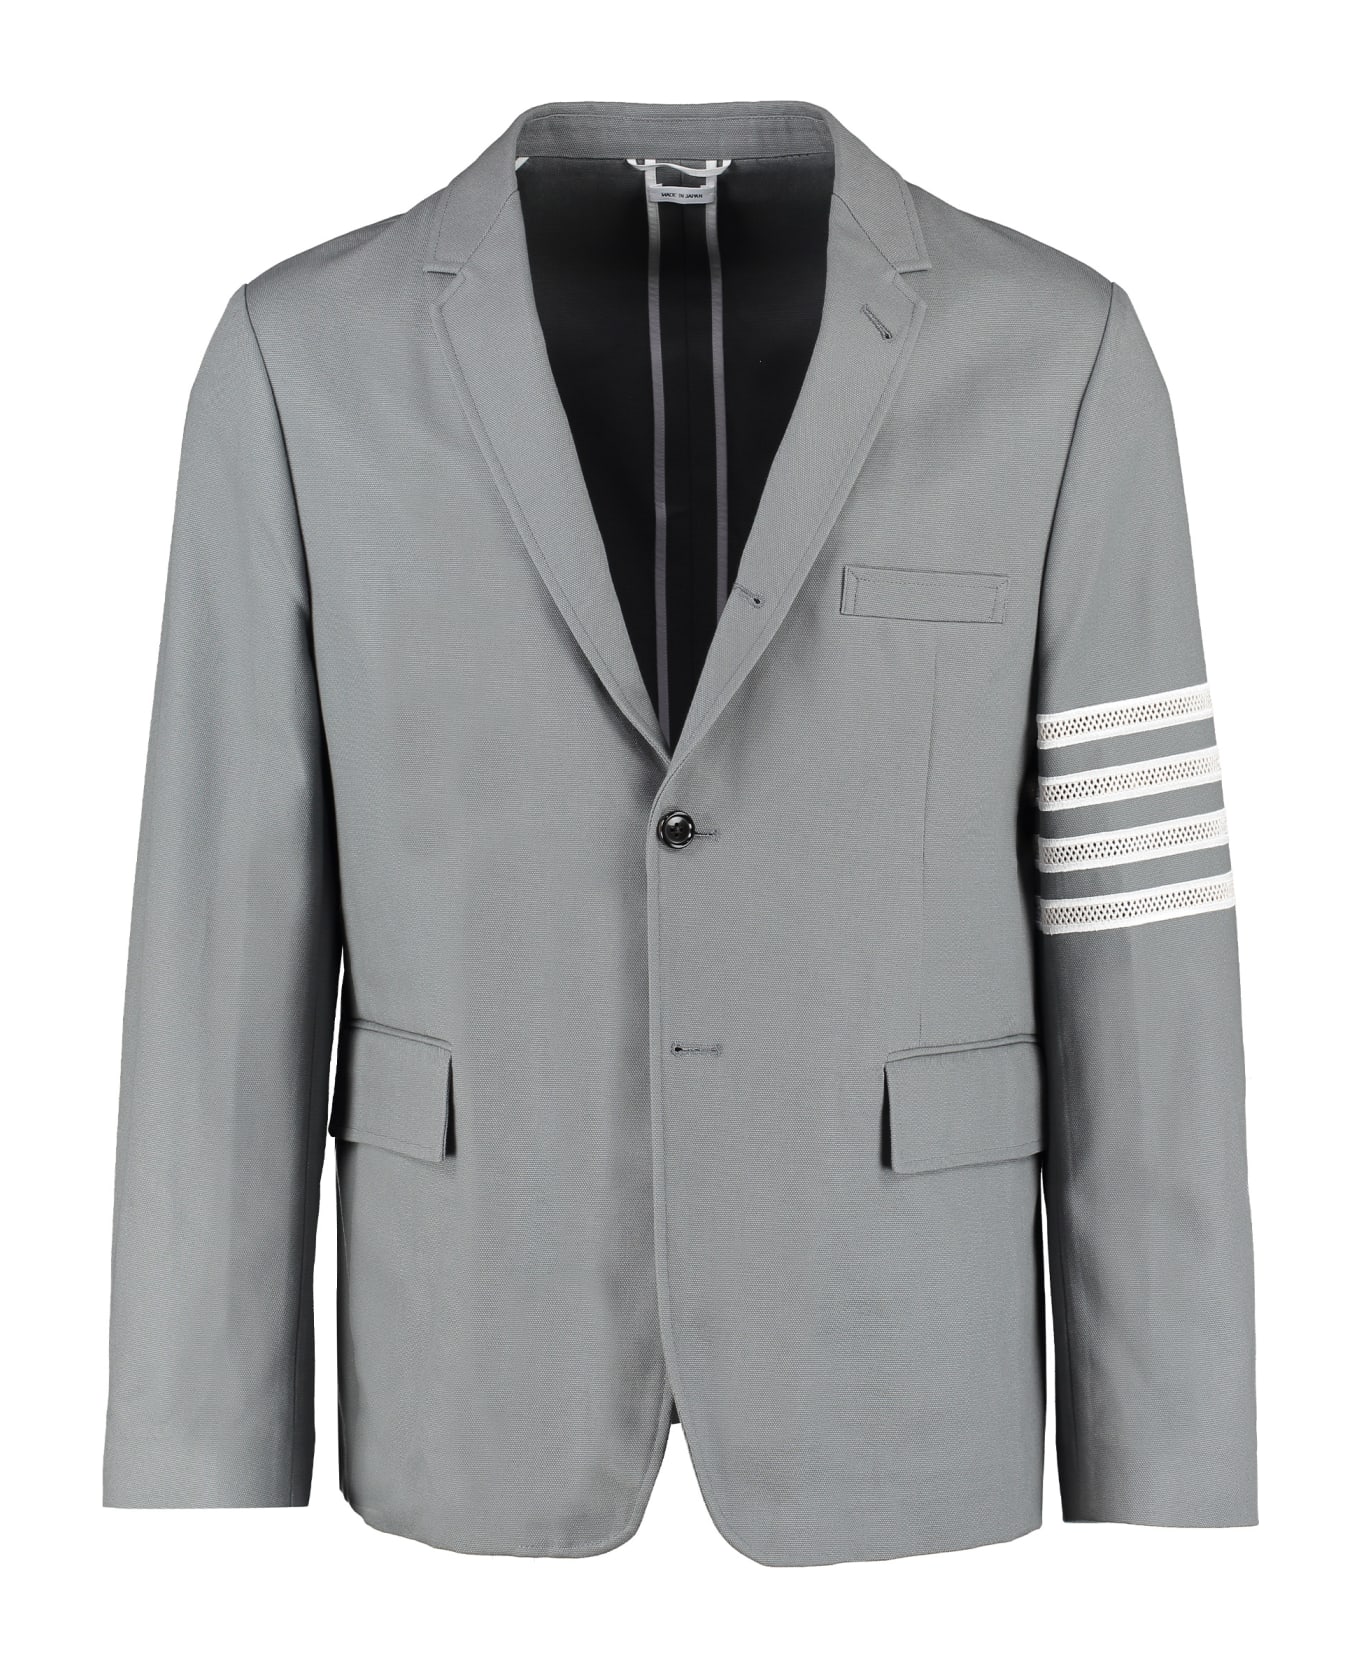 Thom Browne Single-breasted Two Button Jacket - grey ブレザー